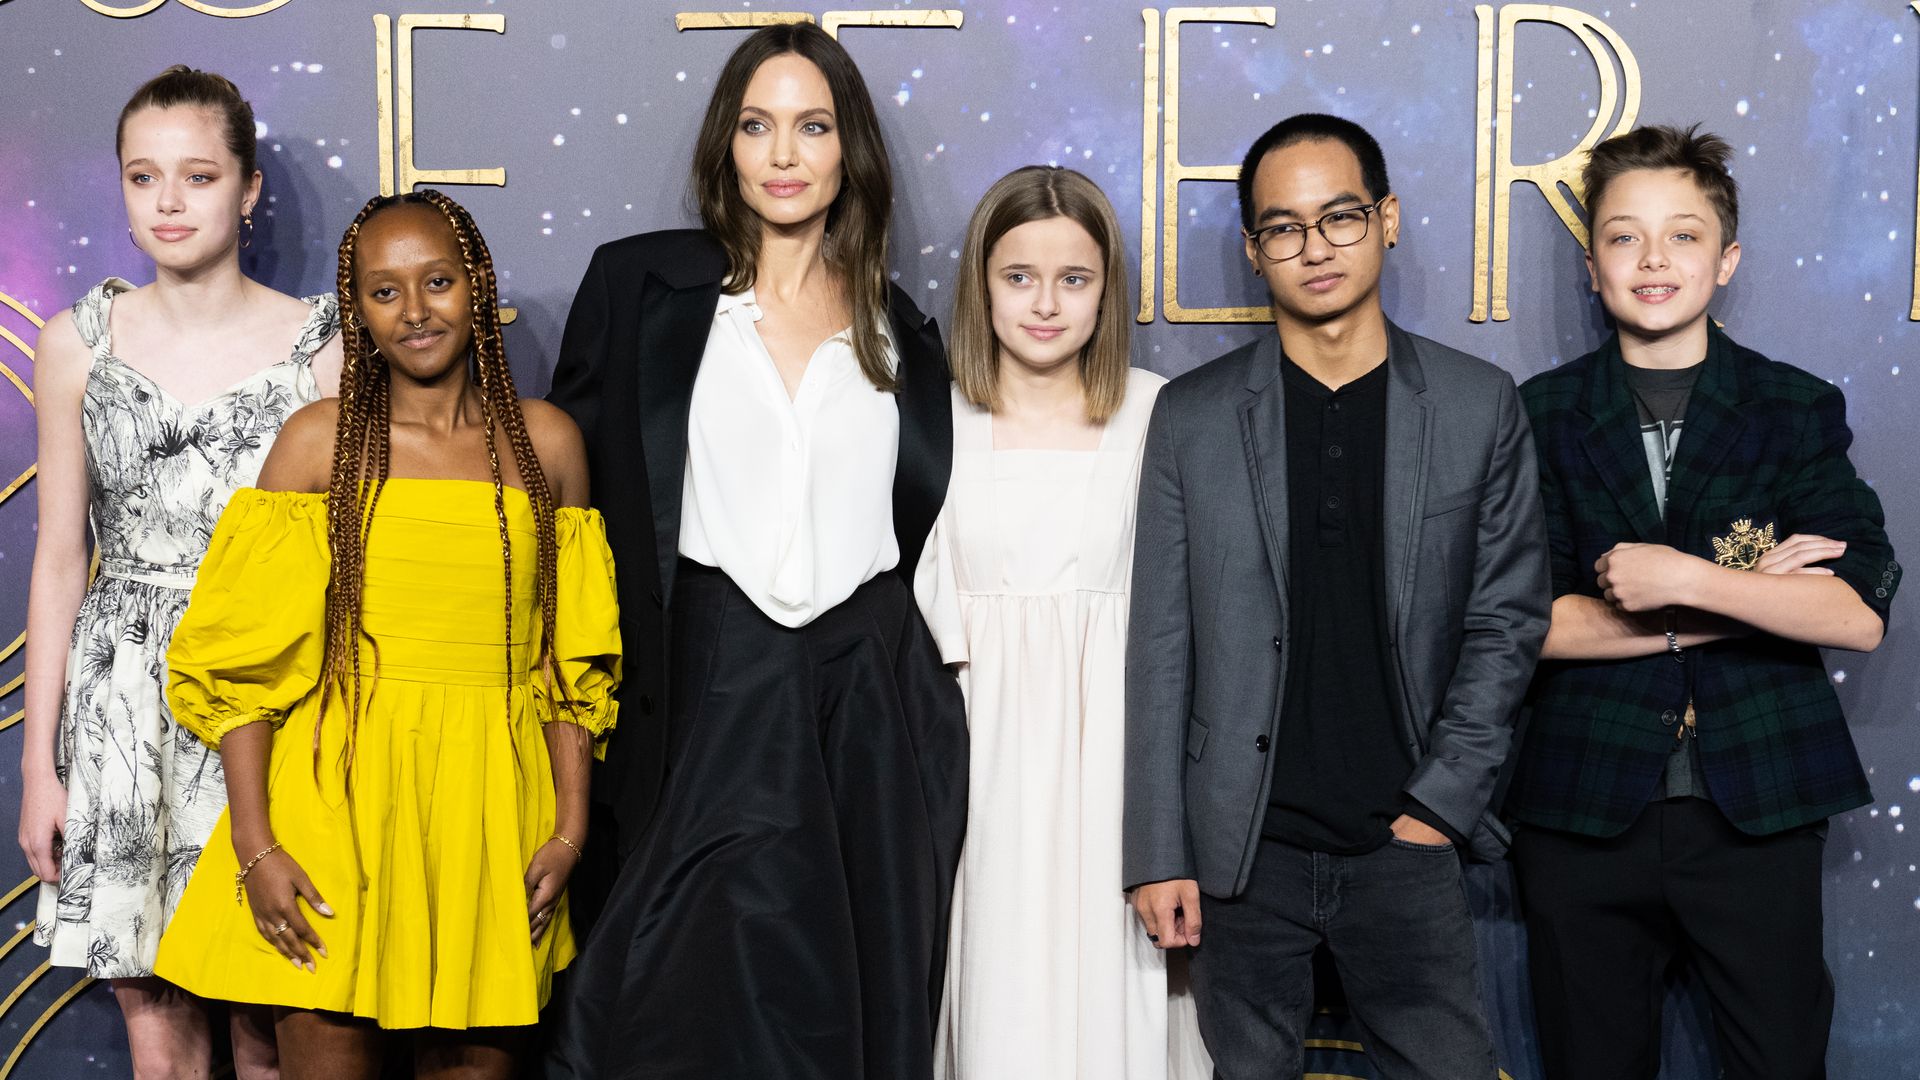 Angelina Jolie and her kids at the Eternals premiere